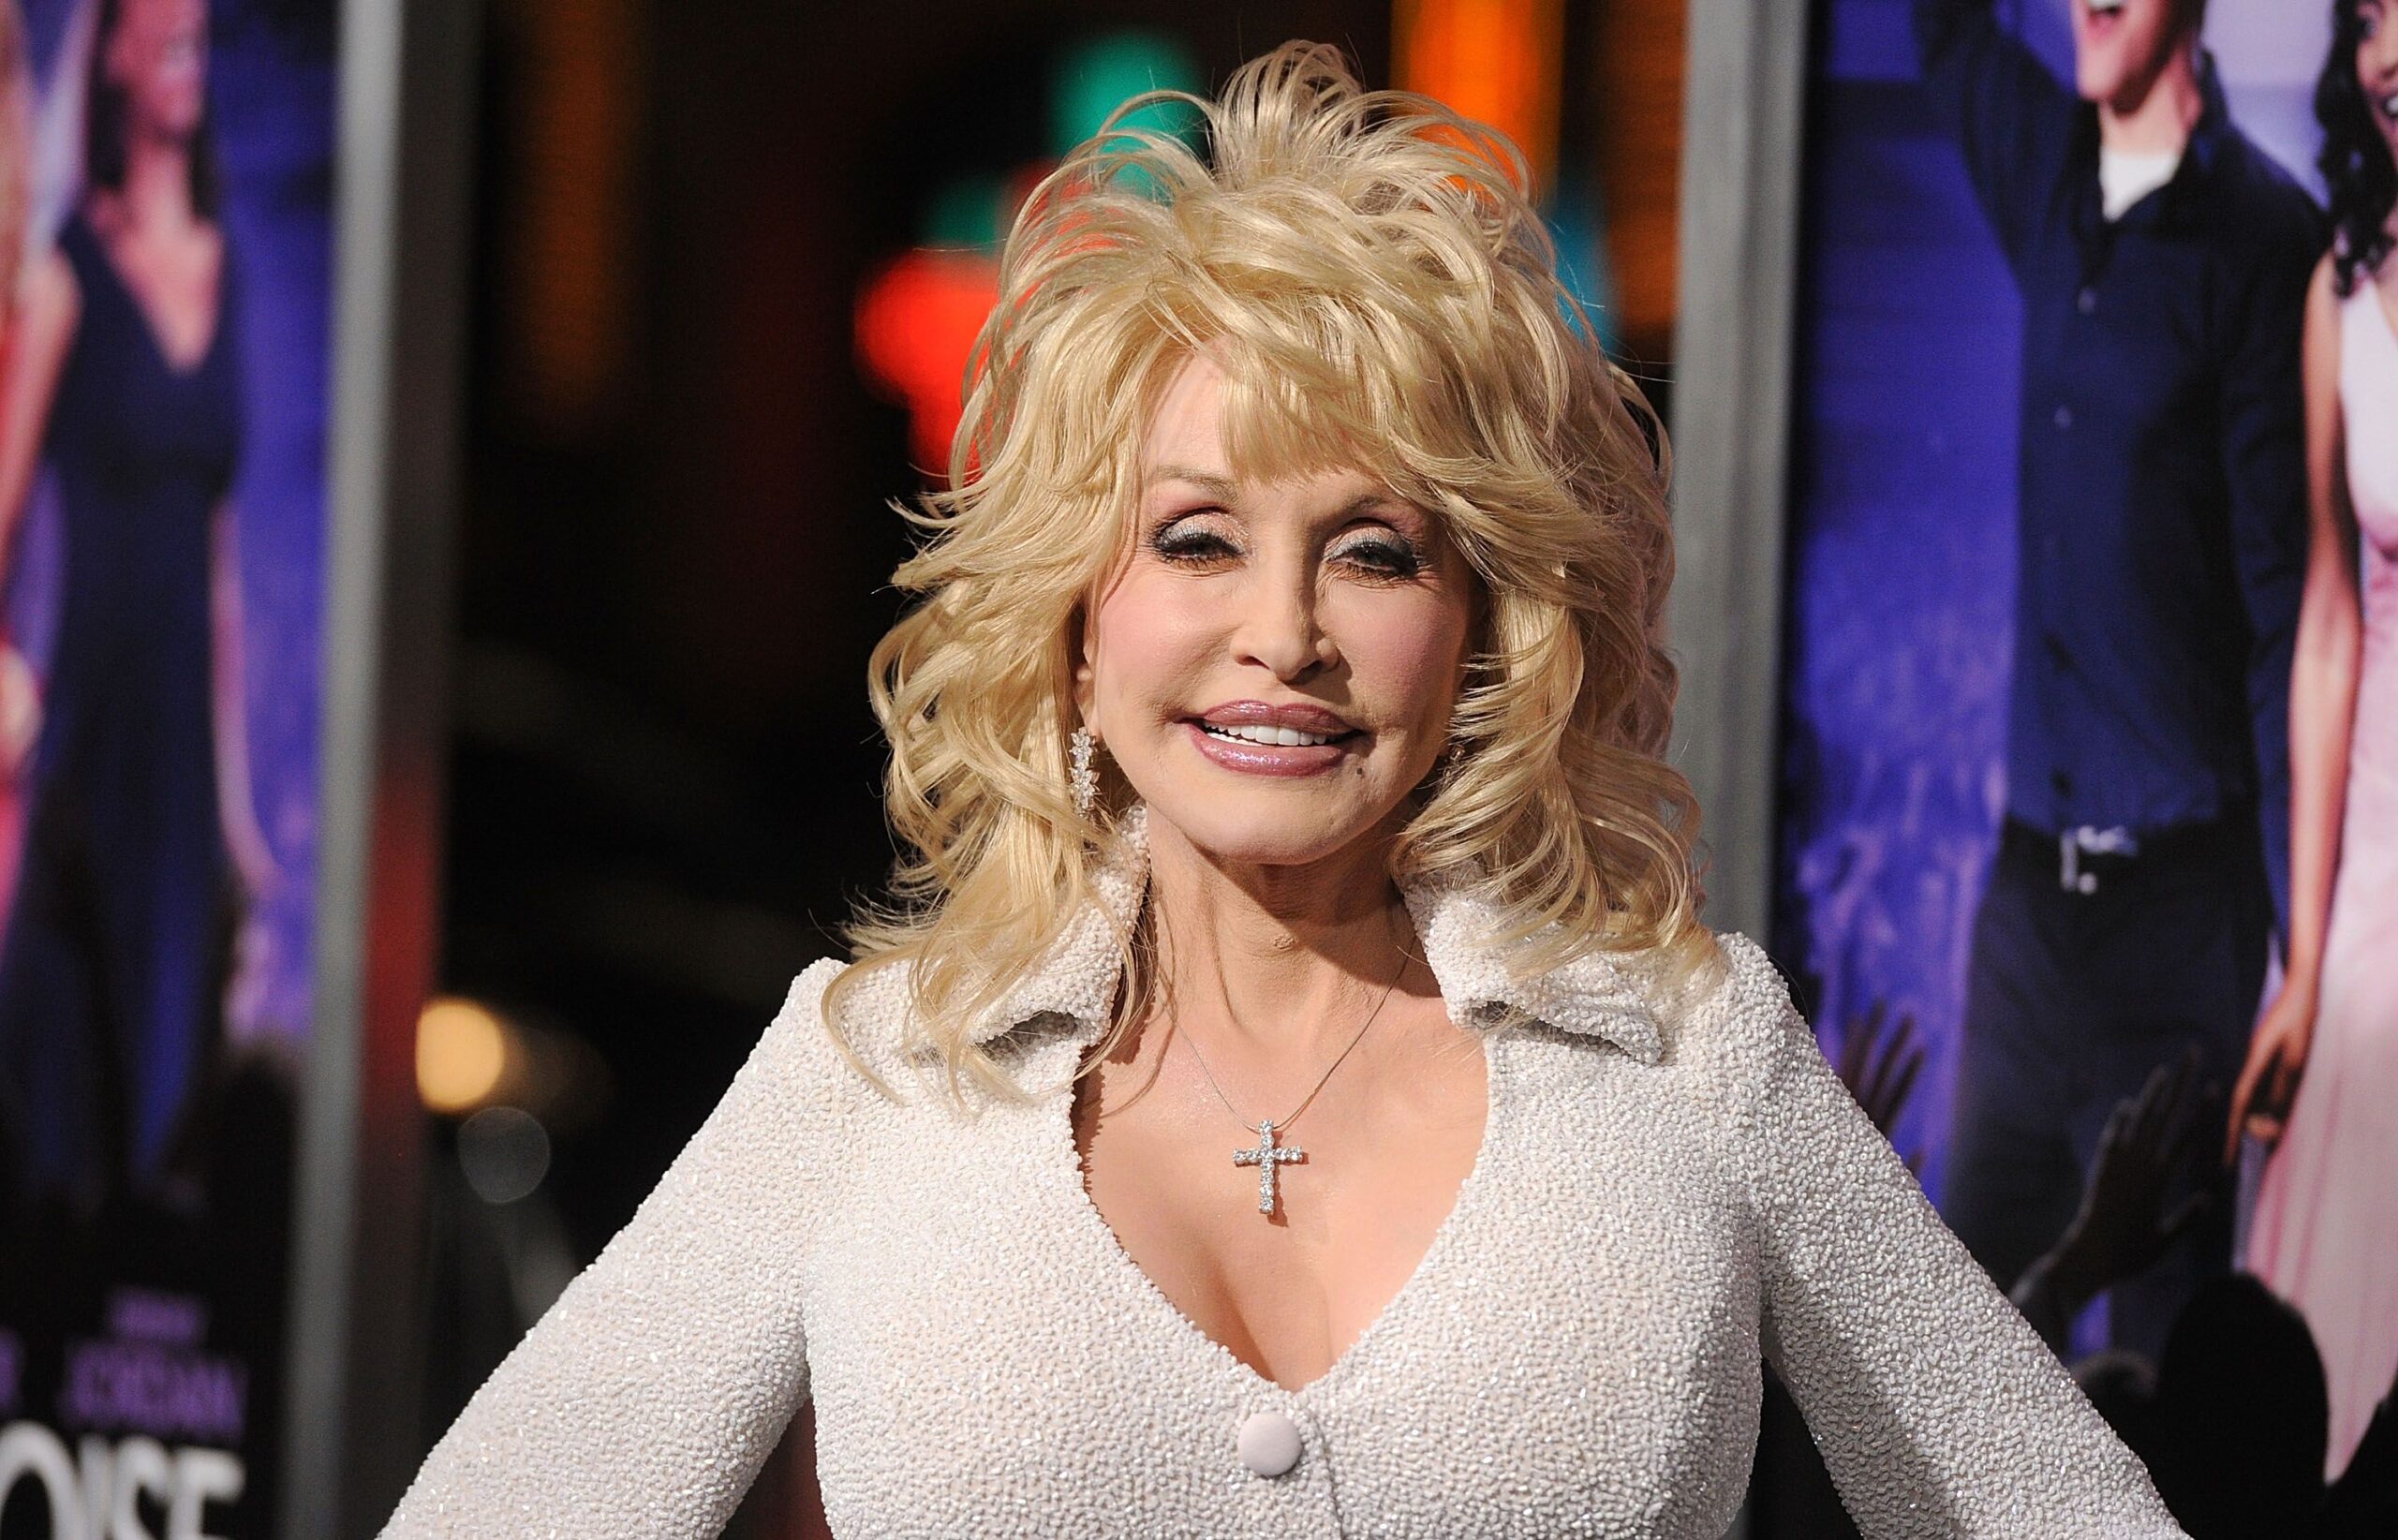 Dolly Parton during the 